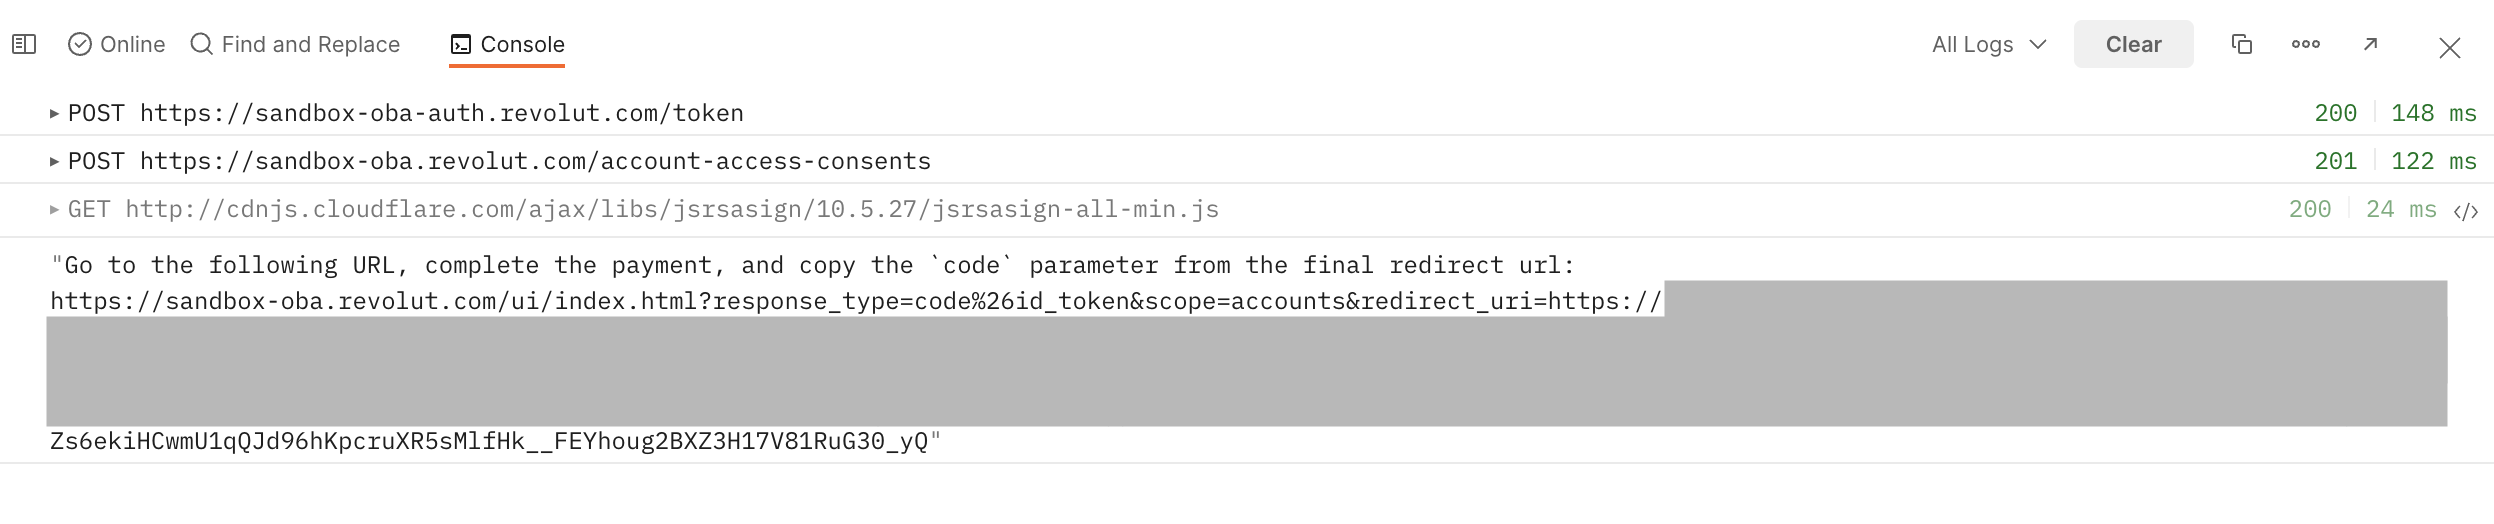 Postman console - Redirect link